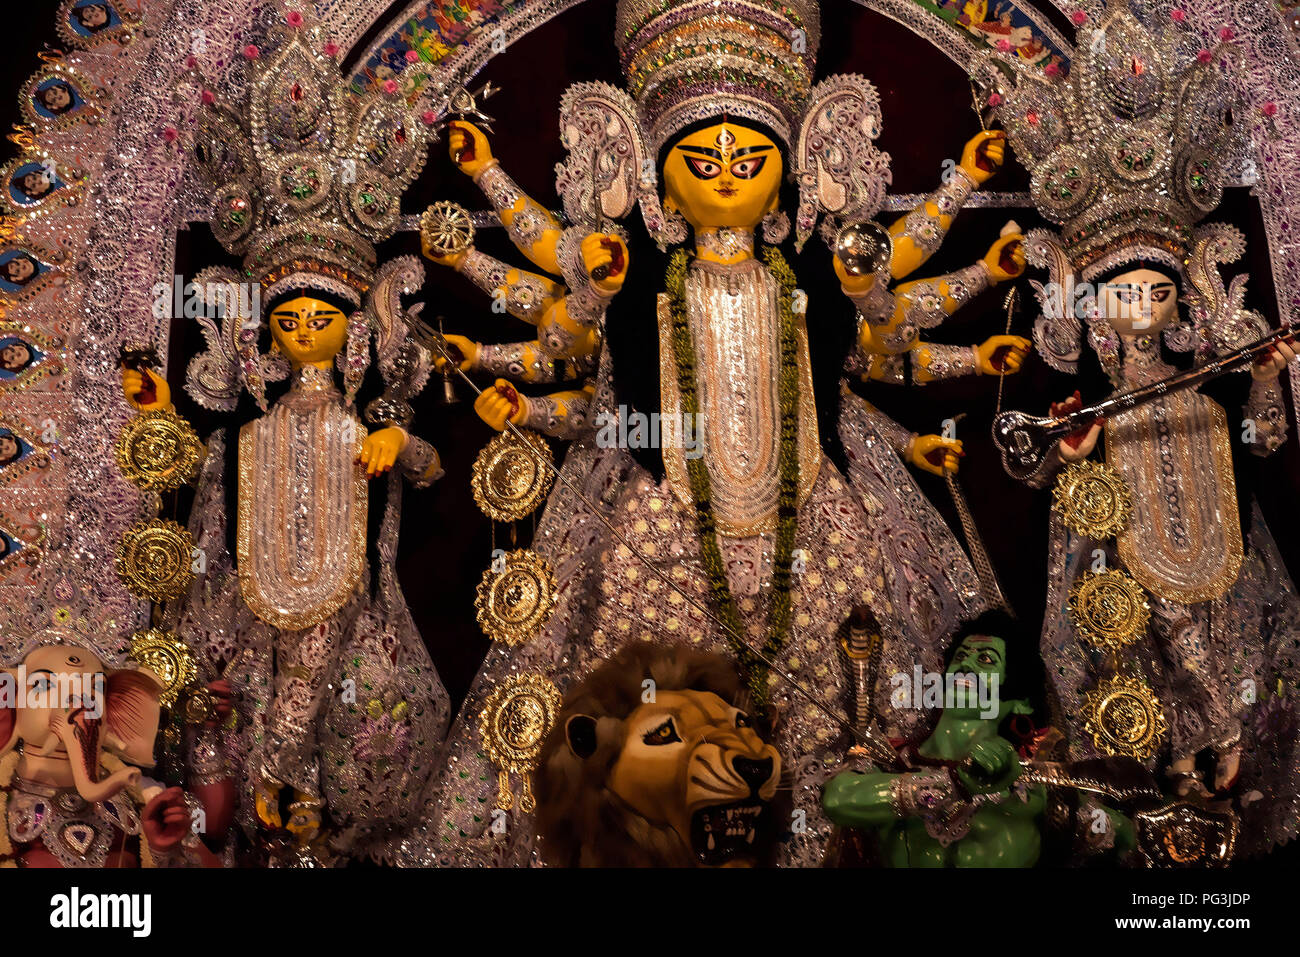 The Goddess Durga,with Her Family,pet lion,Terrible,Devil , worshipped ,Heritage,unchanged model,two centuries,Baghbazar,Kolkata,India. Stock Photo